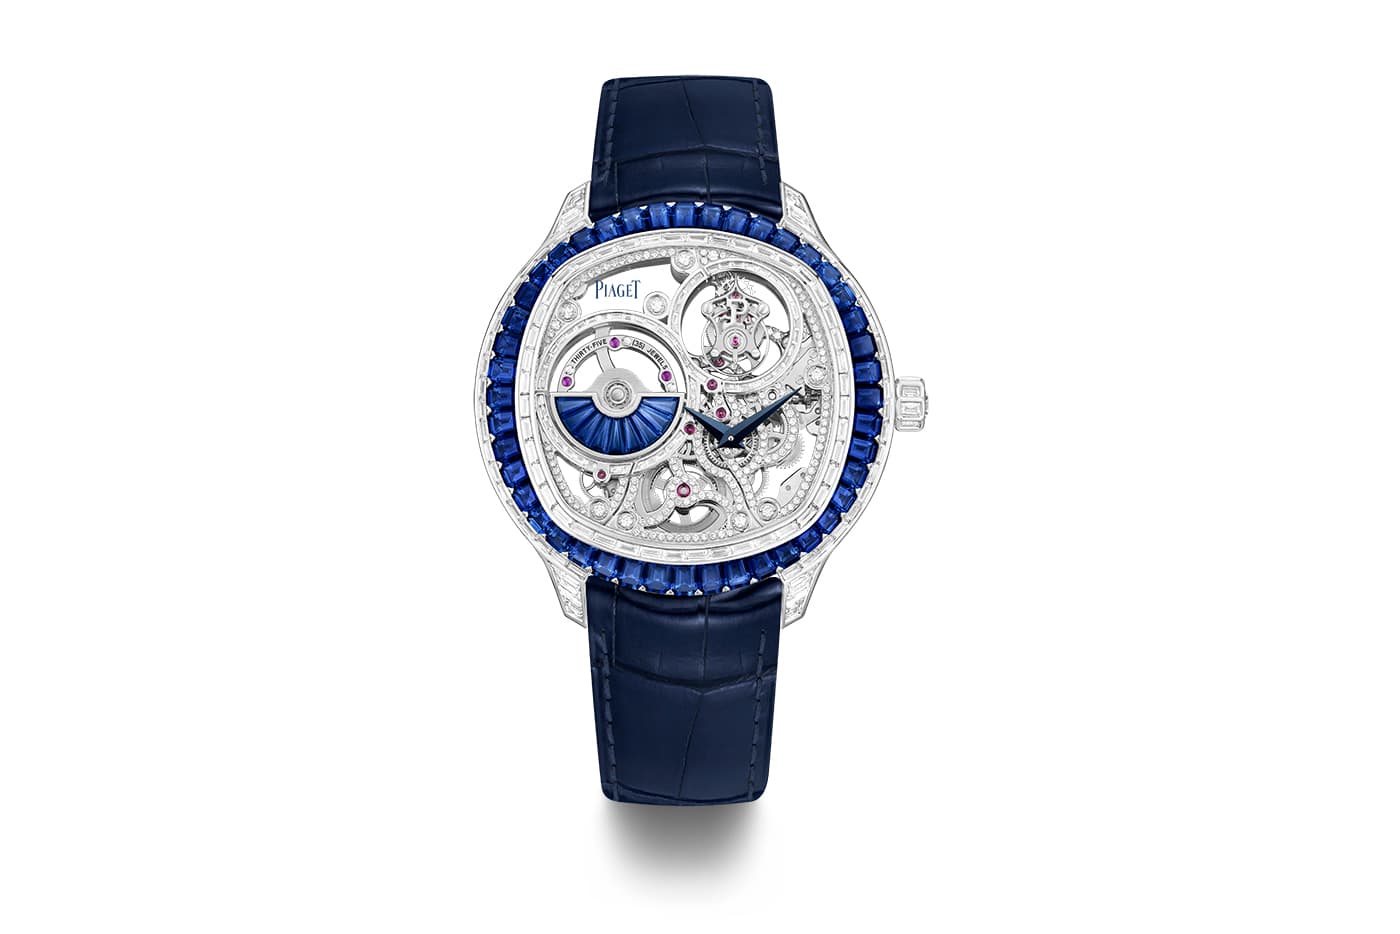 The Polo Emperador Sapphire Skeleton Tourbillon timepiece showcases Piaget's expertise in both watch and jewellery making